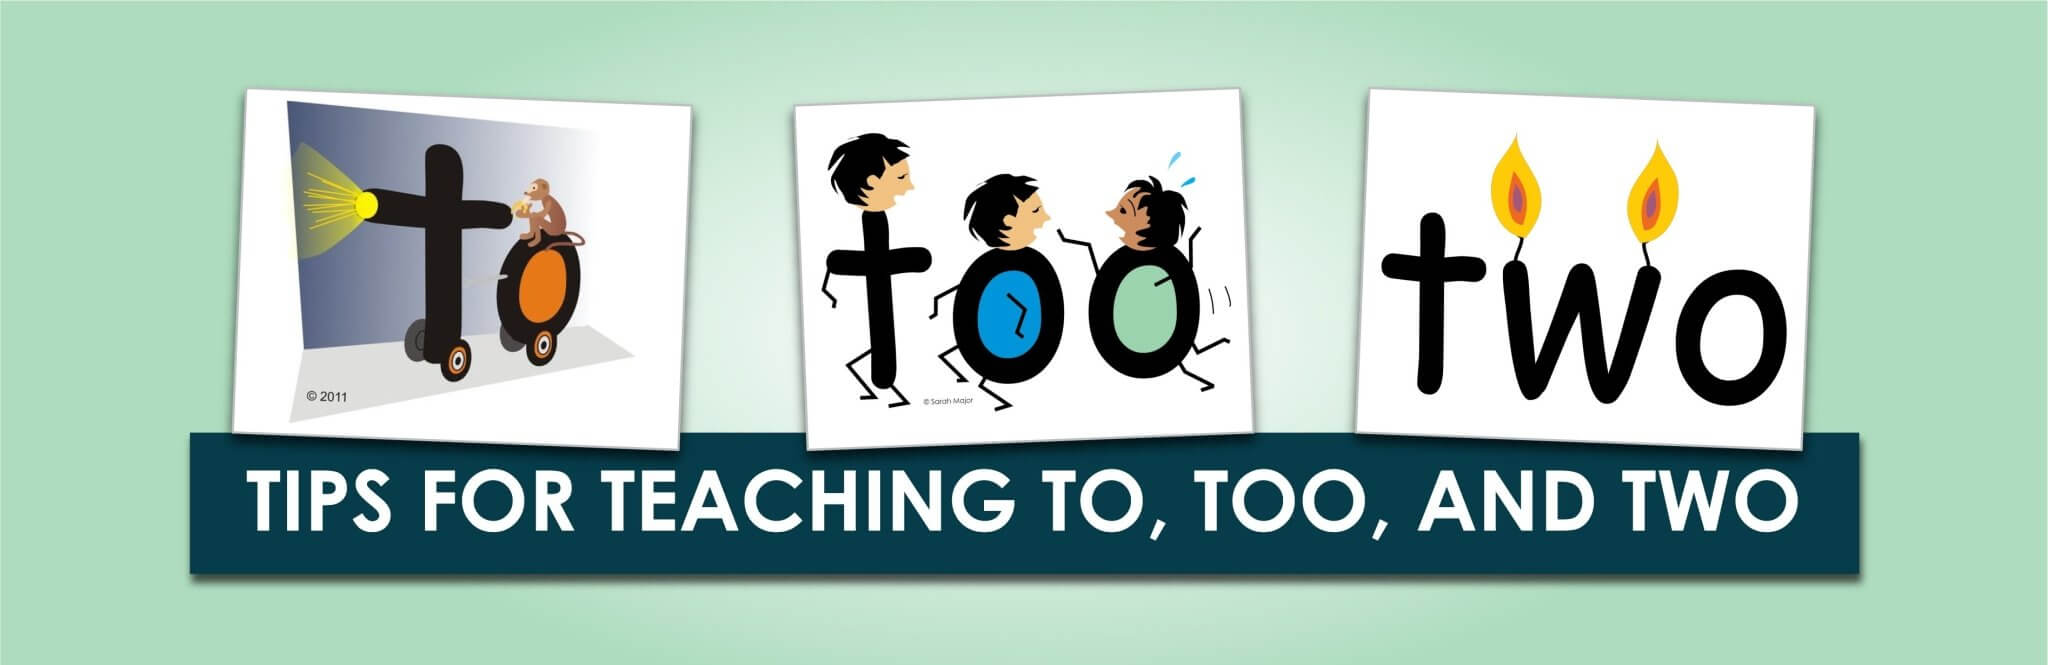 Tips for Teaching To, Too, and Two